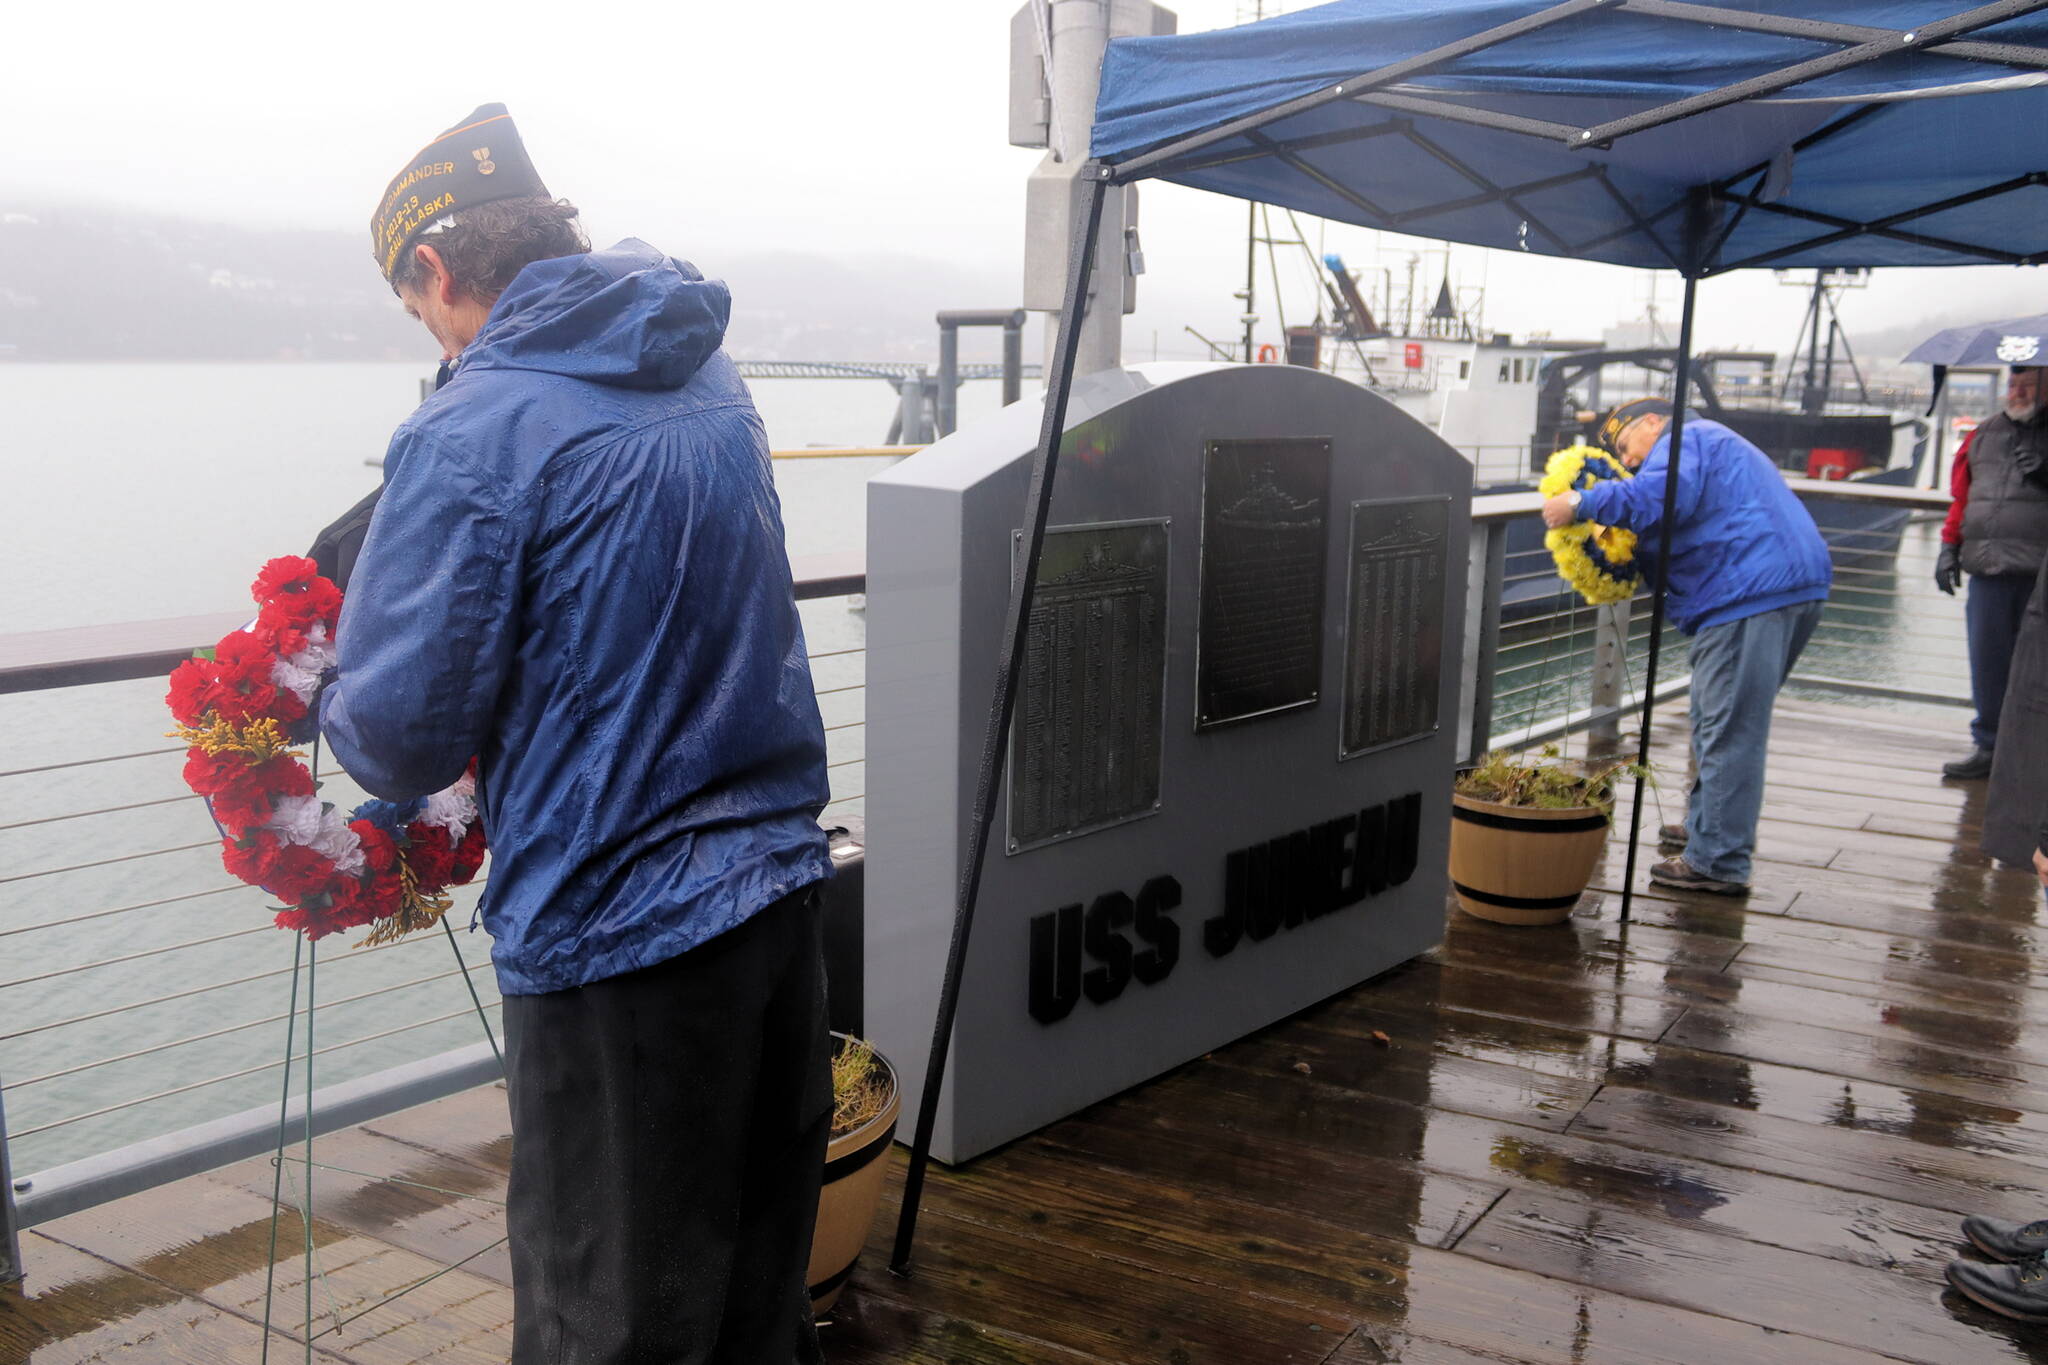 Rob Smith, left, of the American Legion Auke Bay Post 25, and Dan McCrummen, quartermaster of Veterans of Foreign Wars Taku Post 5559, place wreaths Sunday on either side of a memorial for the soldiers killed aboard the USS Juneau after it was sunk by torpedoes on Nov. 13, 1942. The current memorial site for the ship’s namesake town debuted 10 years ago after it was relocated from its original site near Marine Park. (Mark Sabbatini / Juneau Empire)